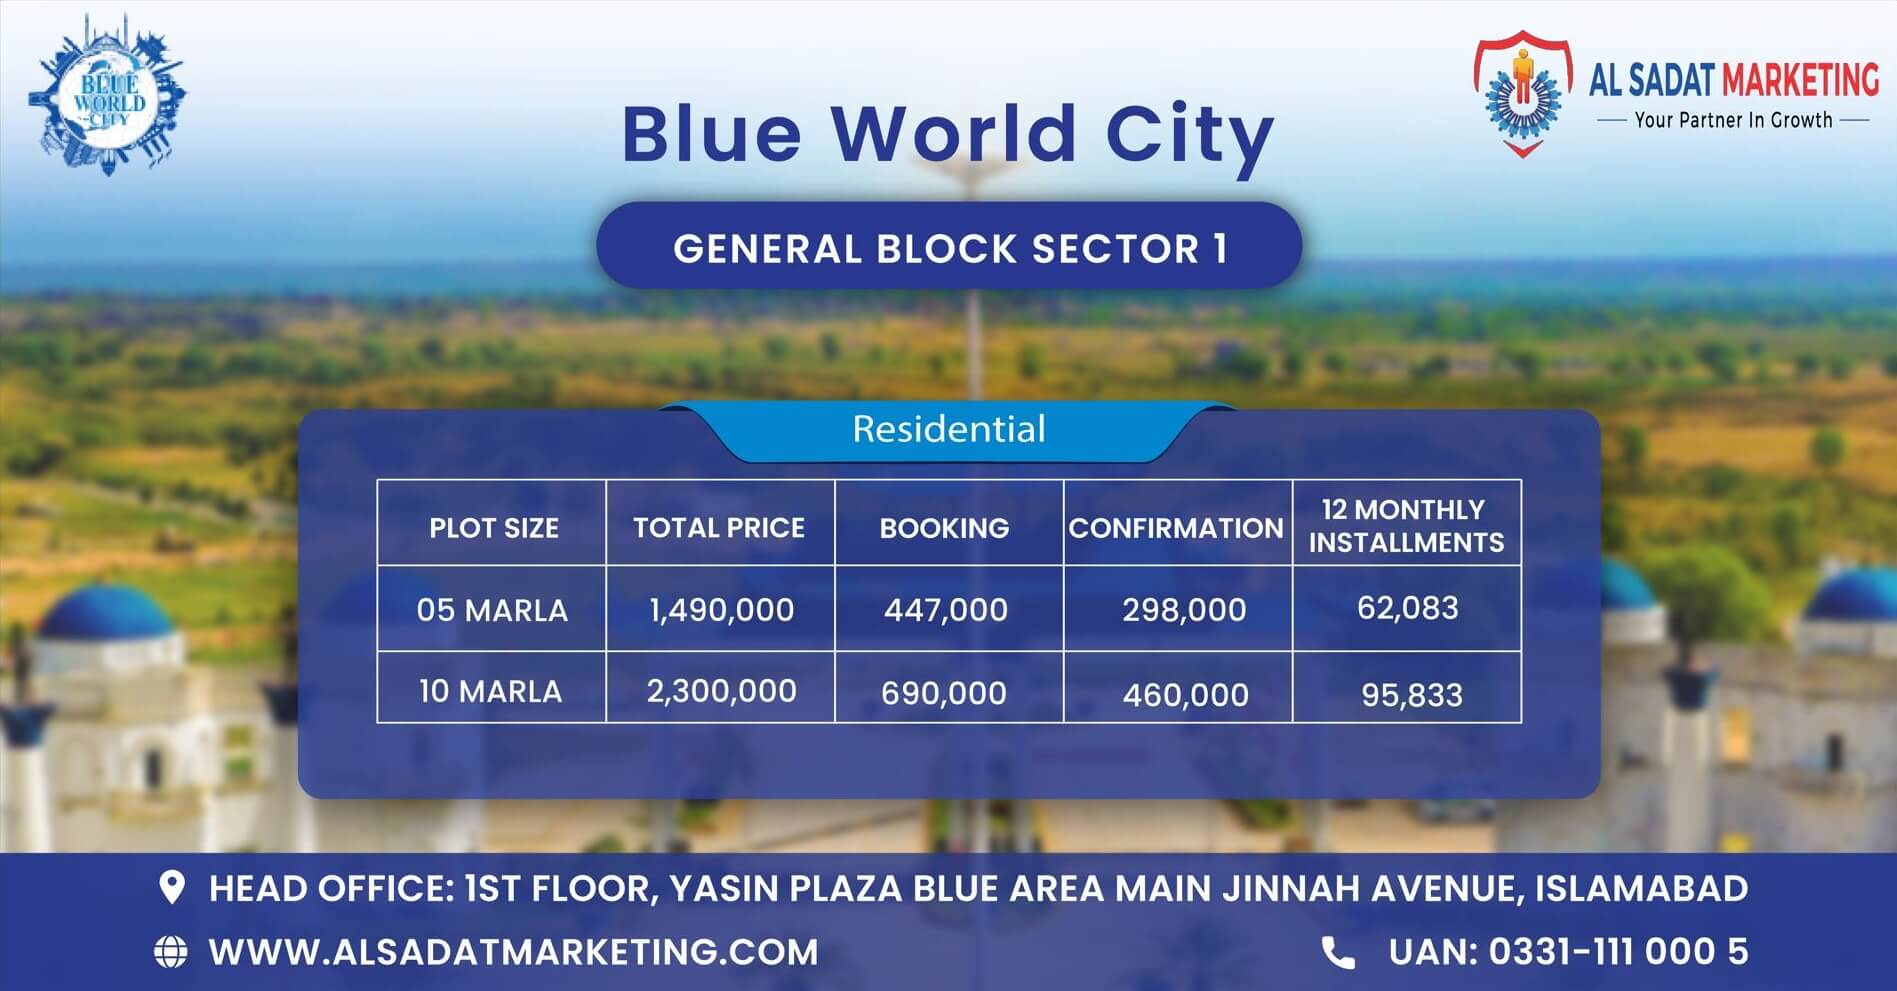 blue world city residential plots payment plan – blue world city islamabad residential plots payment plan – blue world city rawalpindi residential plots payment plan – blue world city general block sector new payment plan – blue world city islamabad general block sector 1 new payment plan – blue world city rawalpindi general block sector 1 new payment plan – blue world city payment plan – blue world city islamabad payment plan - blue world city rawalpindi payment plan – blue world city– blue world city islamabad – blue world city rawalpindi– blue world city housing society – blue world city islamabad housing society – blue world city real estate project – blue world city islamabad real estate project - al sadat marketing - alsadat marketing - al-sadat marketing